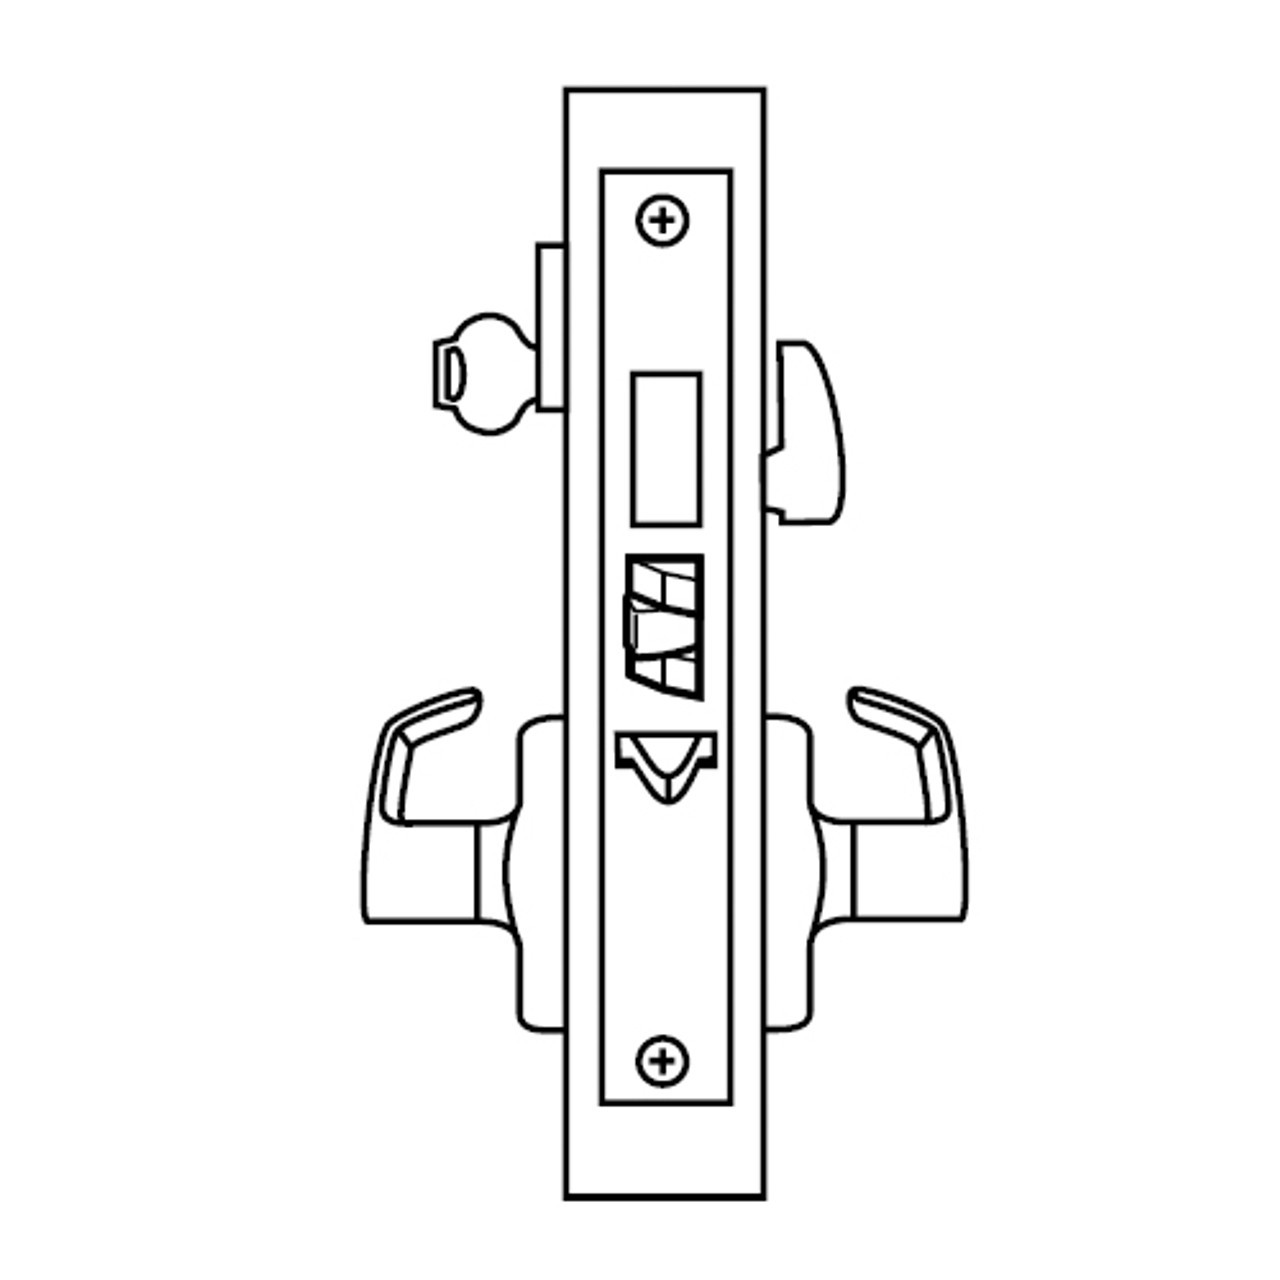 ML2075-DSR-625-LH Corbin Russwin ML2000 Series Mortise Entrance or Office Security Locksets with Dirke Lever and Deadbolt in Bright Chrome